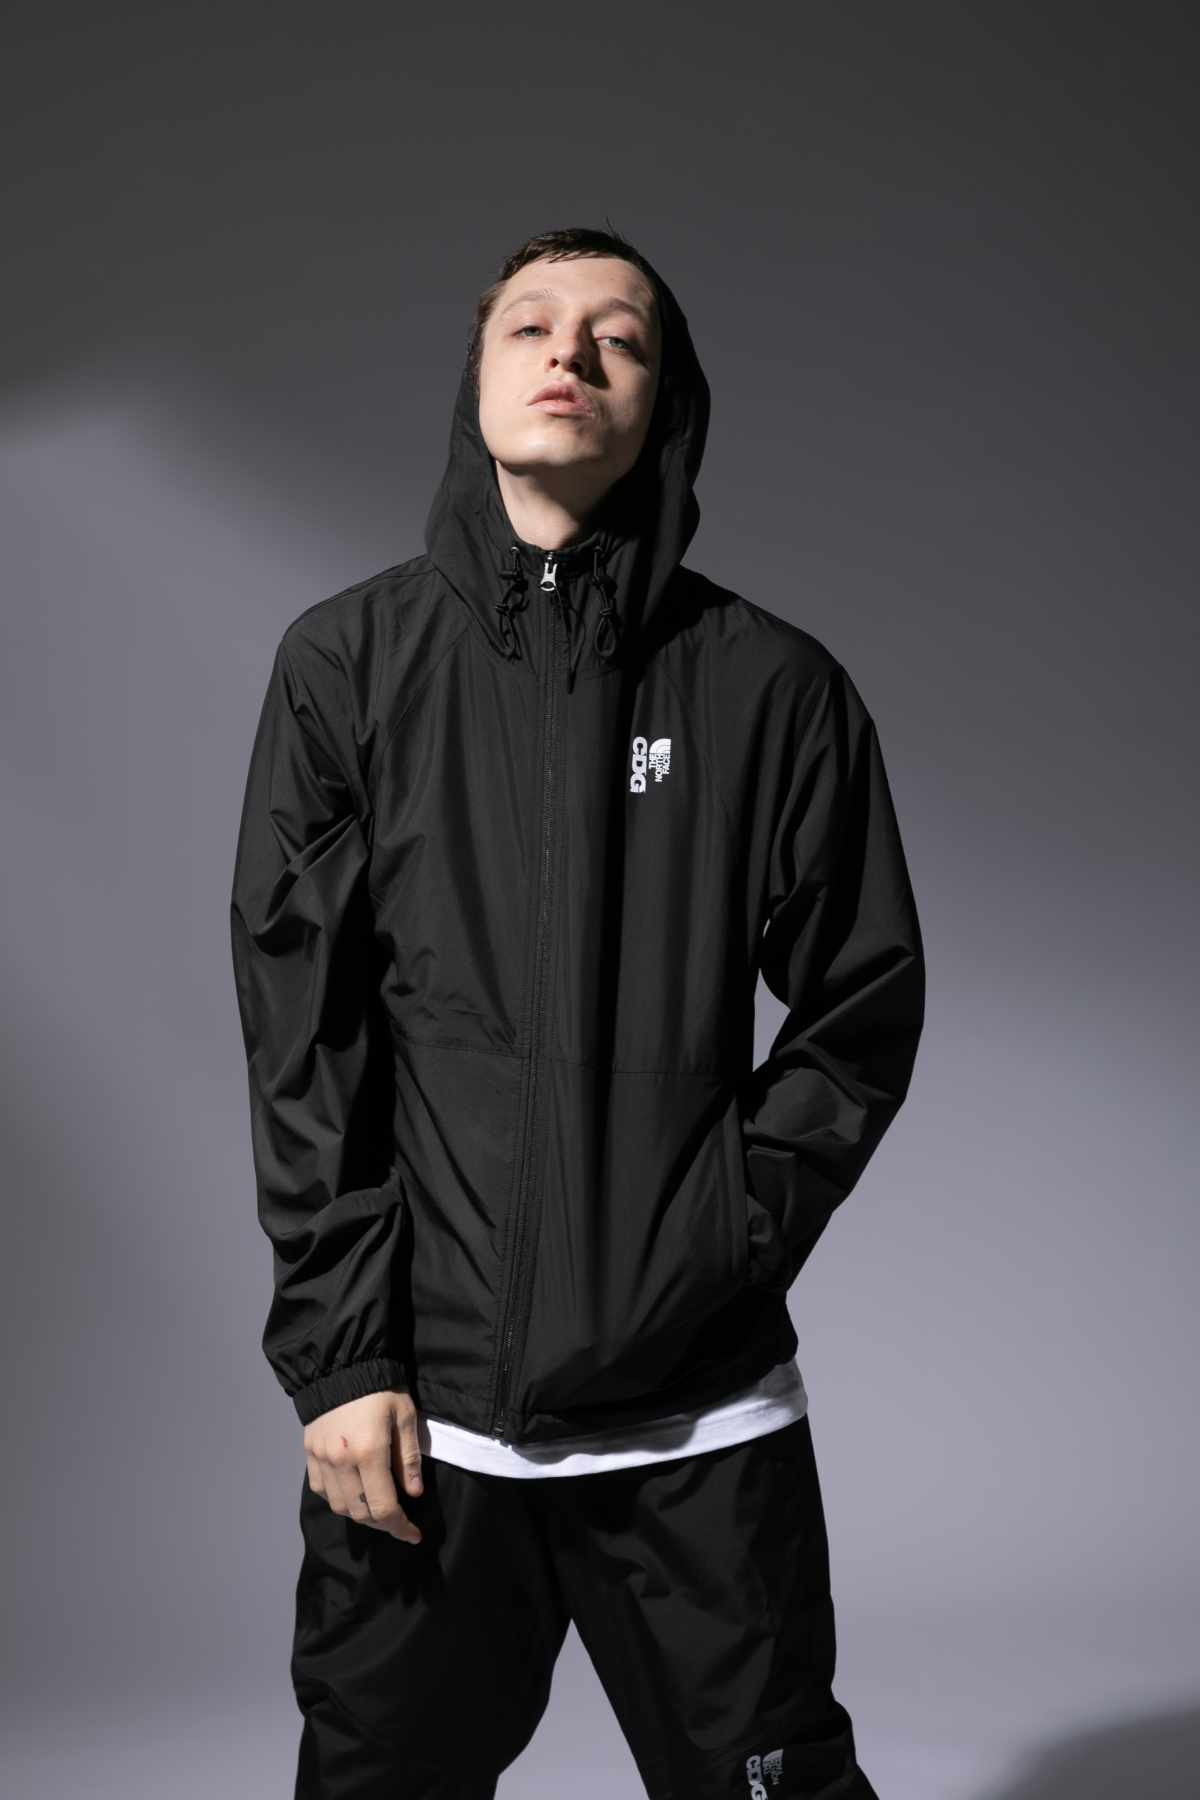 A male model wears the CDG x The North Face collaborative black hooded zip-up jacket